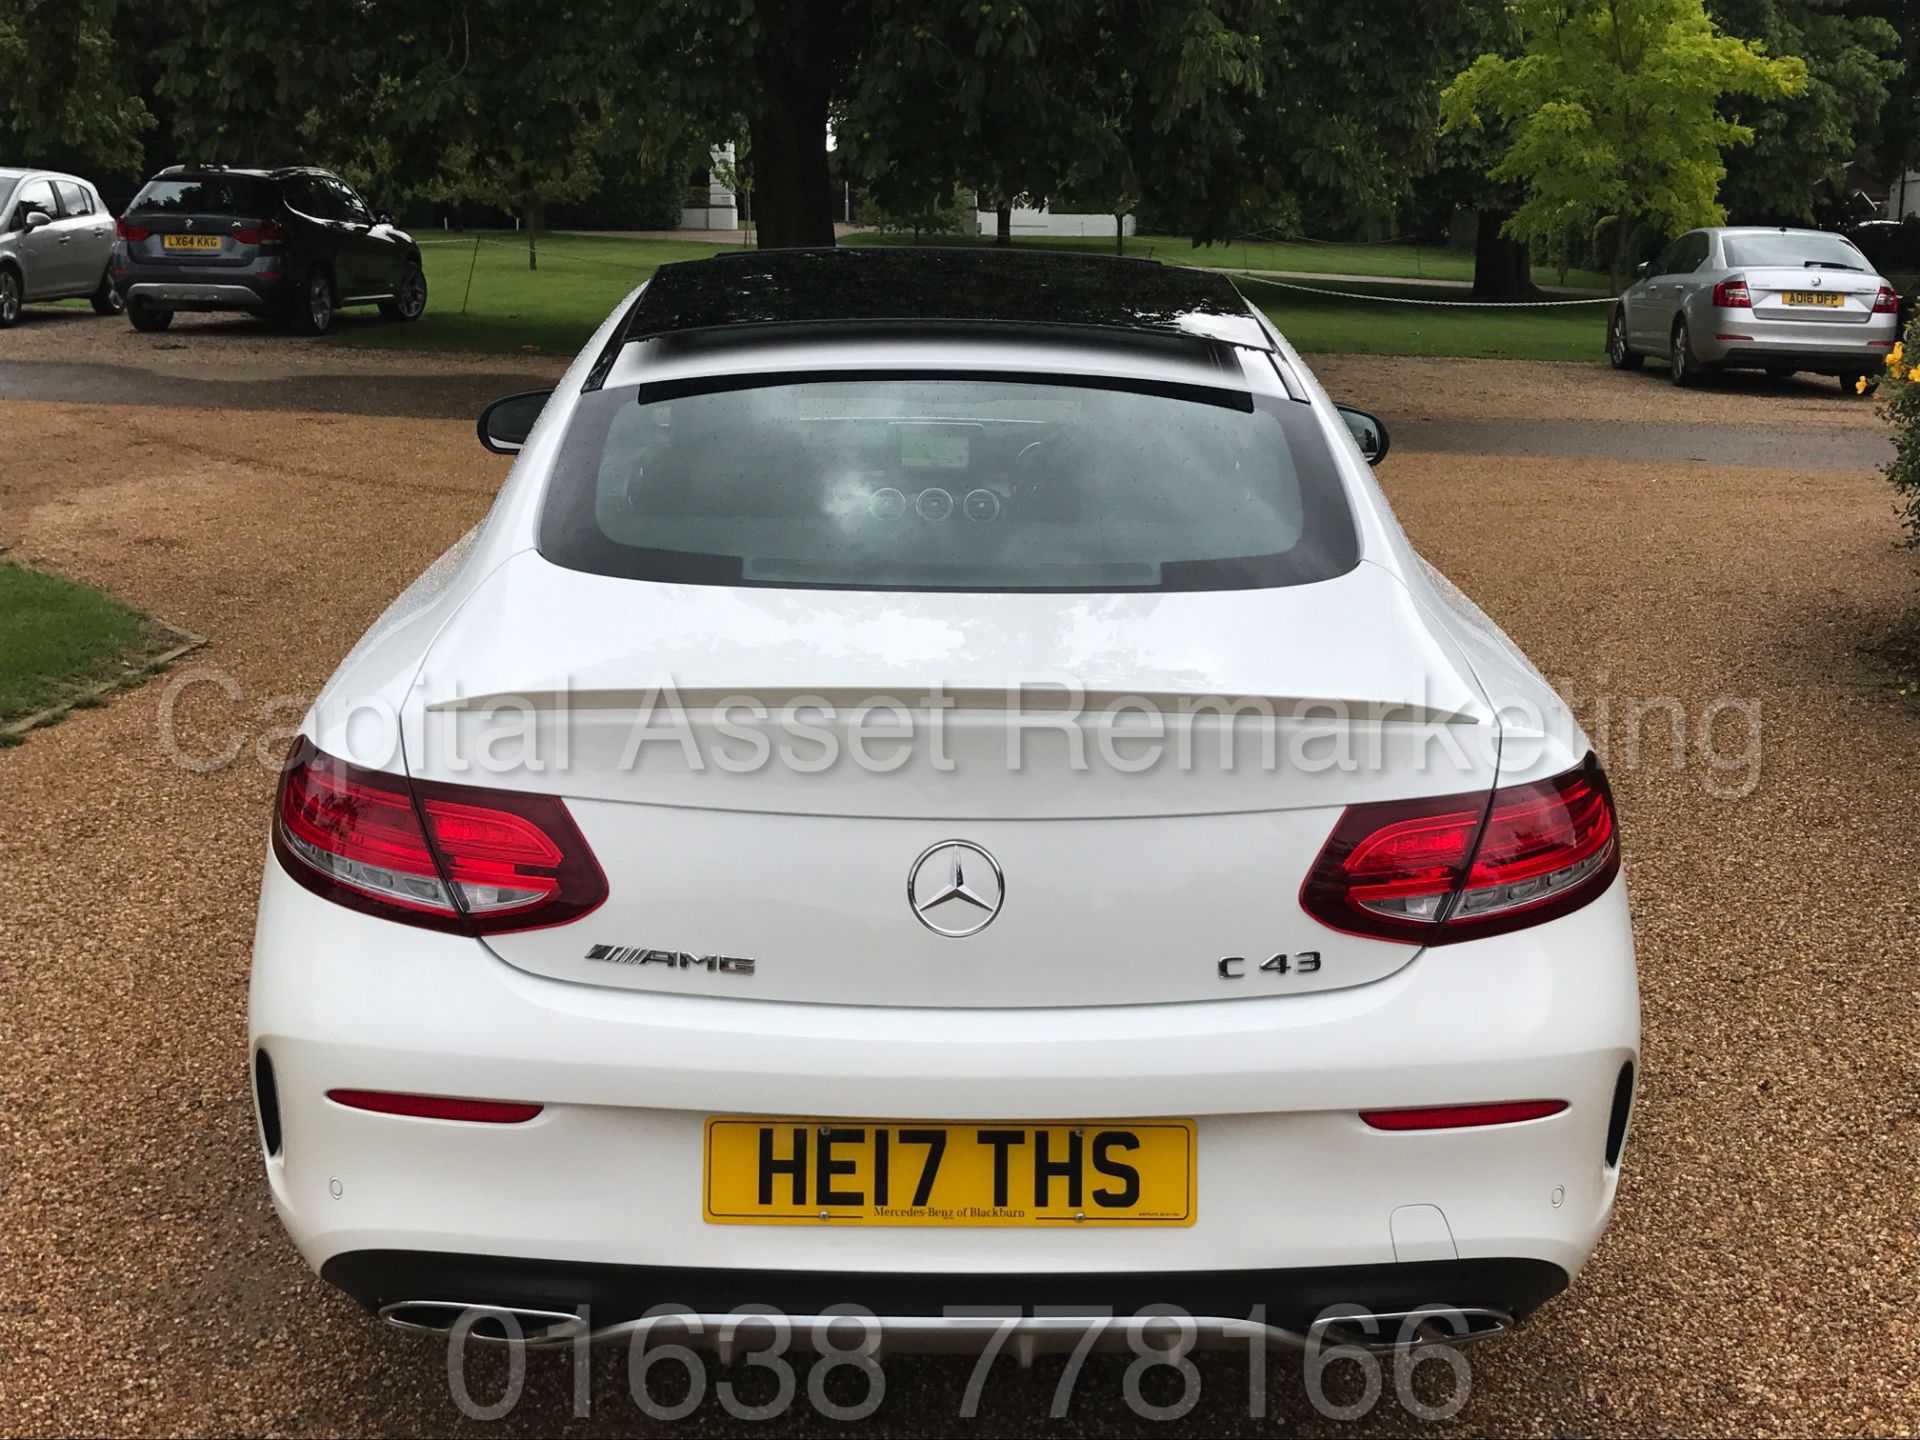 MEREDES-BENZ C43 AMG PREMIUM '4 MATIC' COUPE (2017) '9-G AUTO - LEATHER - SAT NAV' **FULLY LOADED** - Image 13 of 57